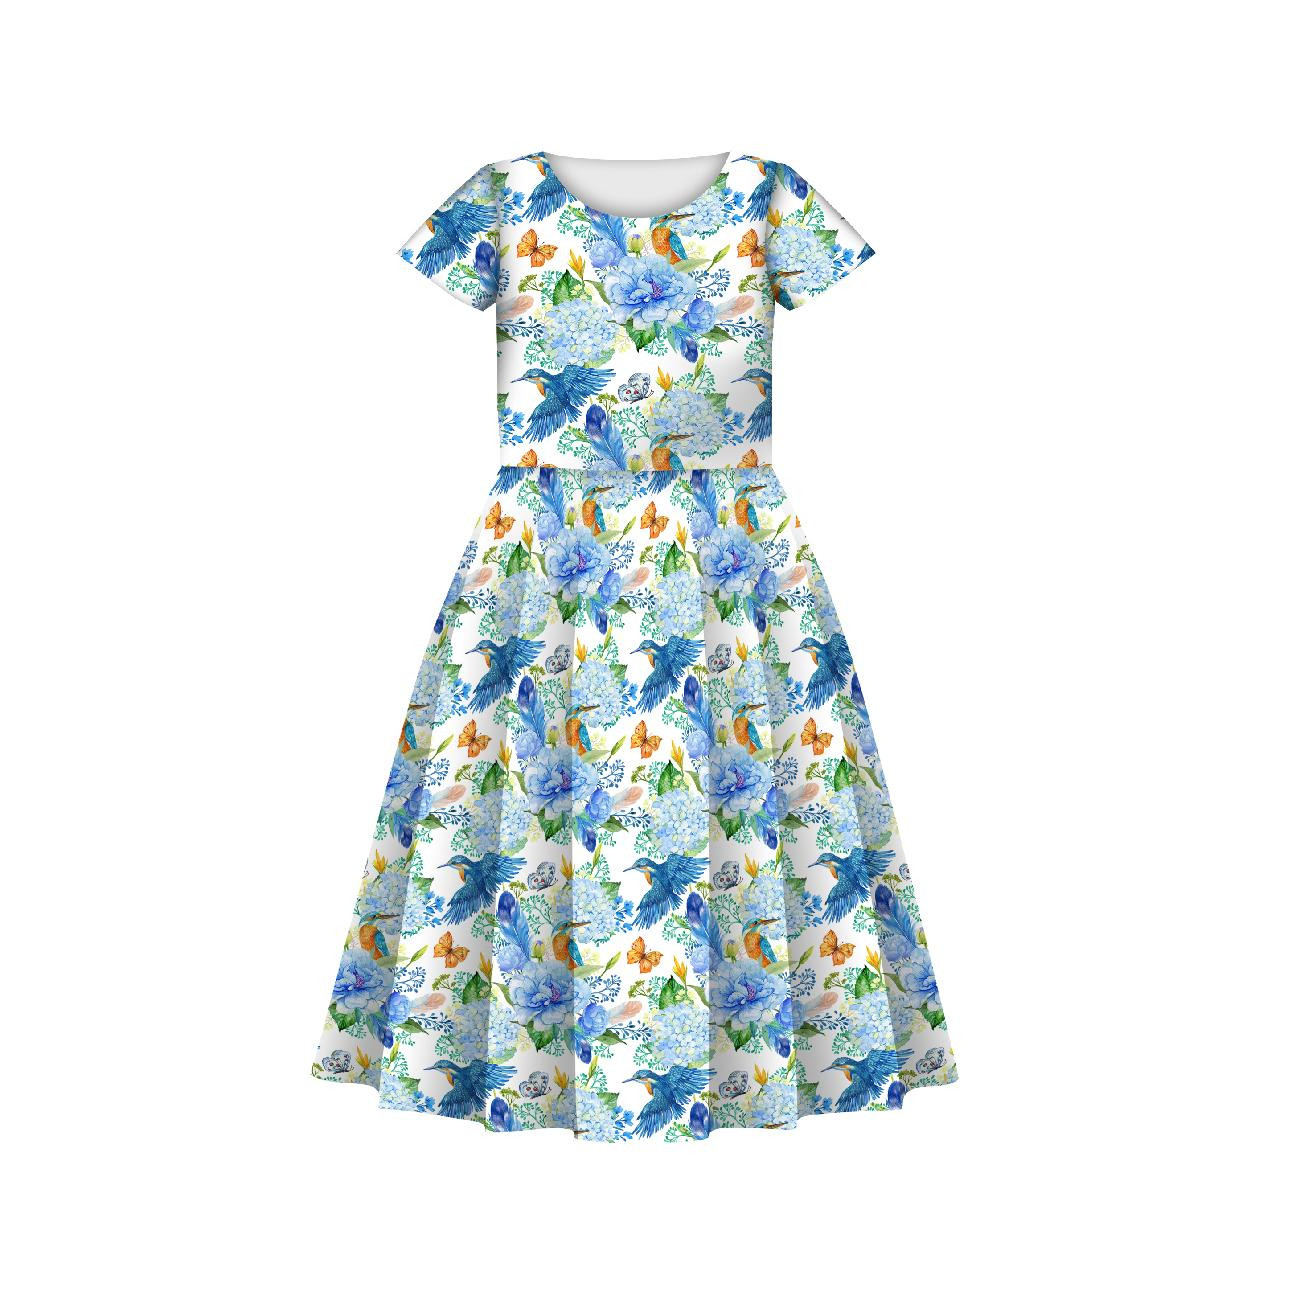 KID'S DRESS "MIA" - KINGFISHERS AND LILACS (KINGFISHERS IN THE MEADOW) / white - sewing set